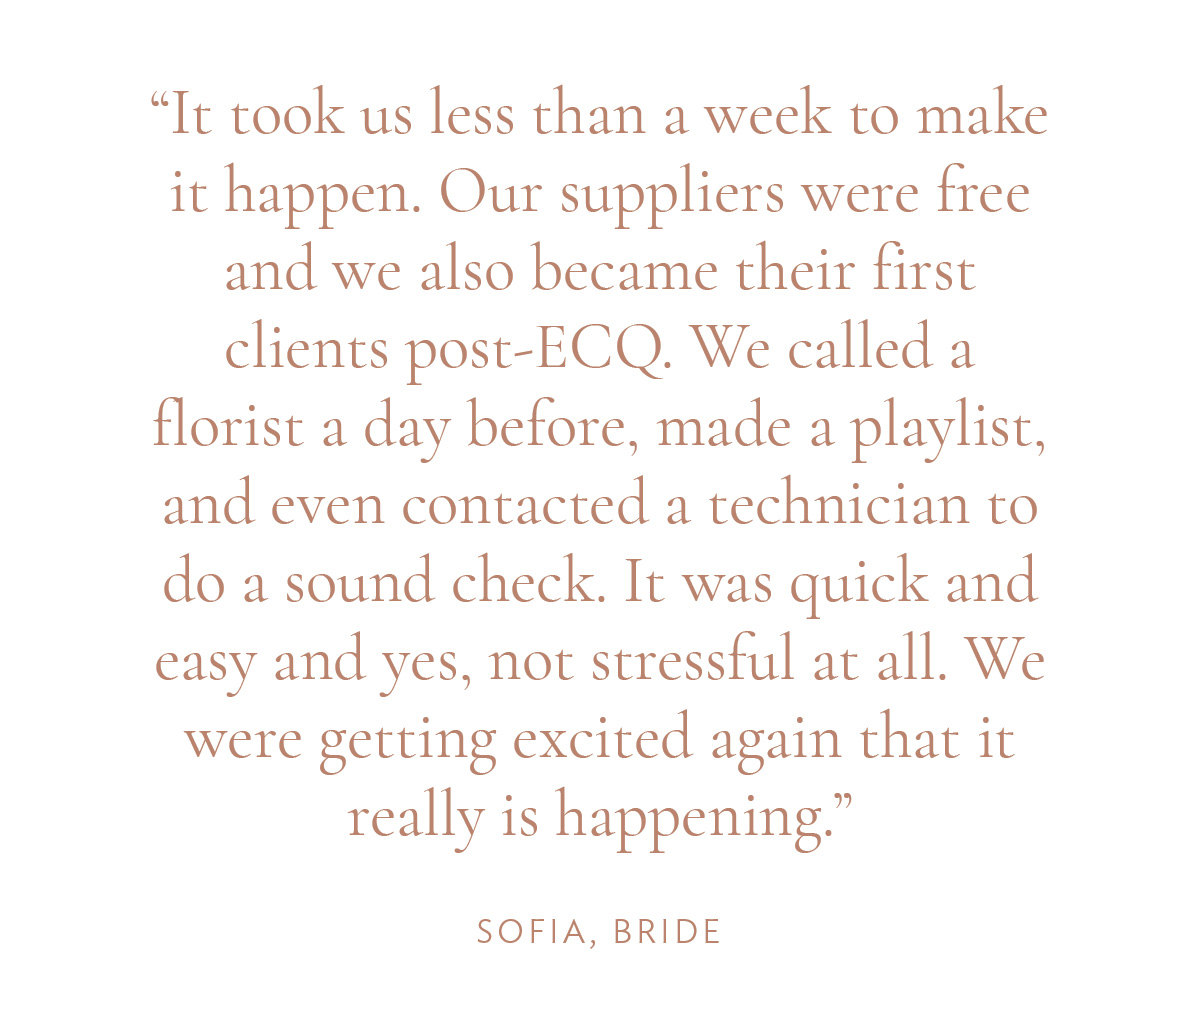 "It took us less than a week to make it happen. Our suppliers were free and we also became their first clients post-ECQ. We called a florist a day before, made a playlist, and even contacted a technician to do a sound check. It was quick and easy and yes, not stressful at all. We were getting excited again that it really is happening." -Sofia, Bride